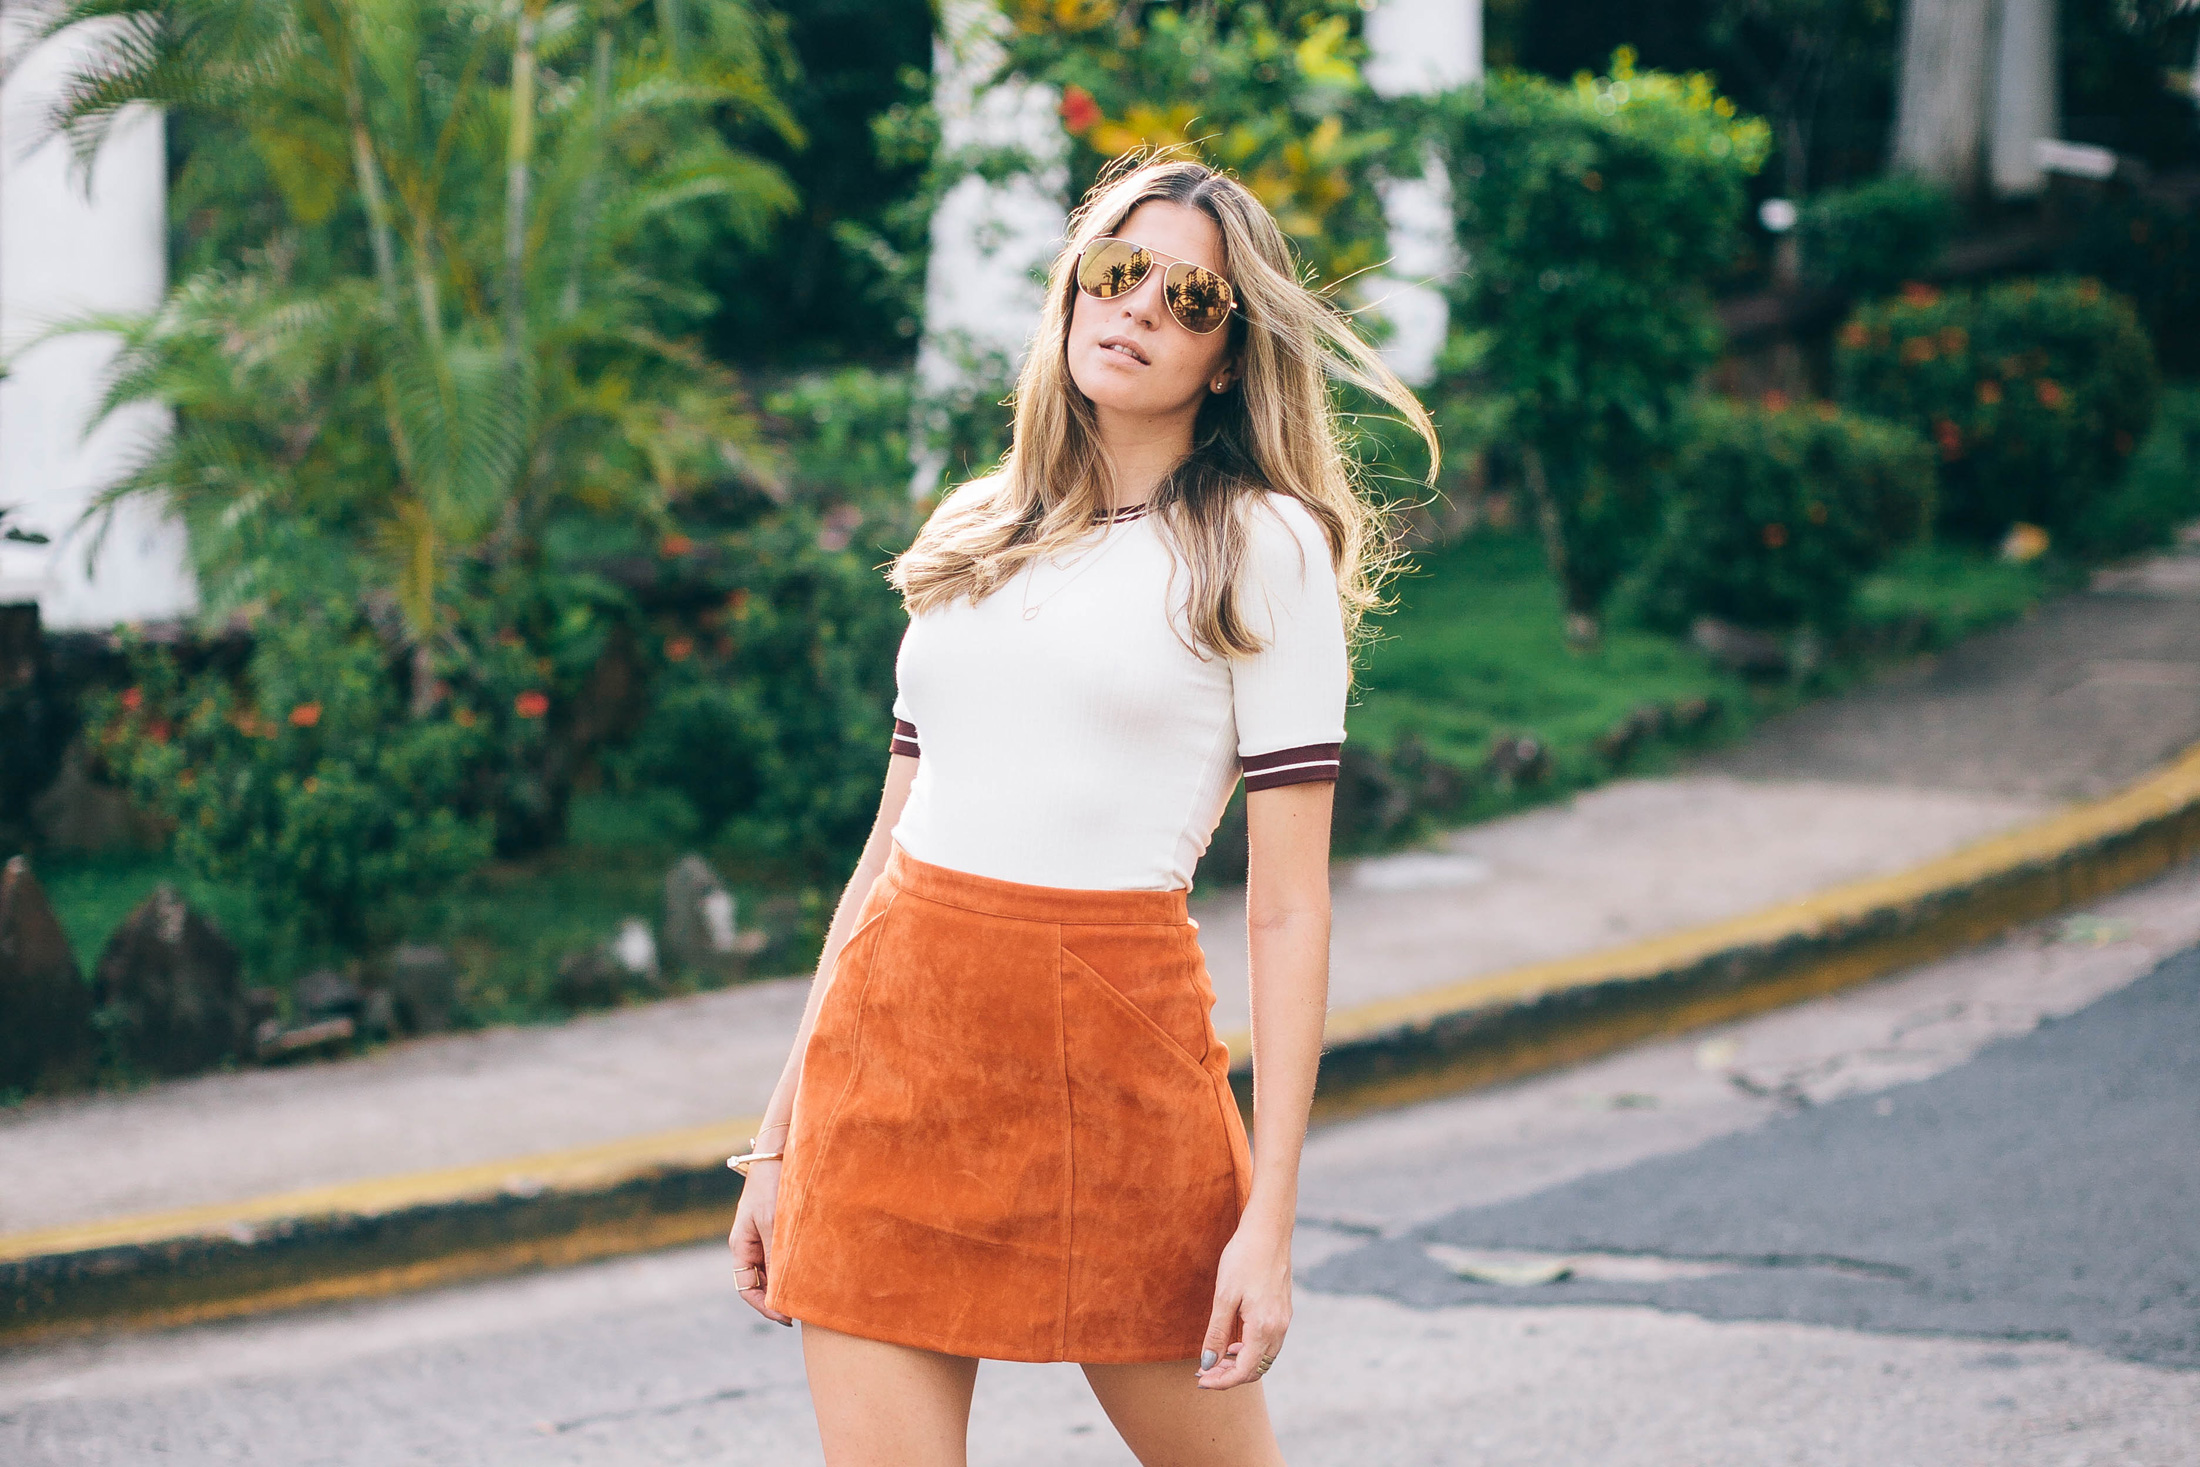 Suede A Line Skirt by Minkpink and fitted ribbed top by H&M, Saint Laurent gold mirrored aviator sunglasses